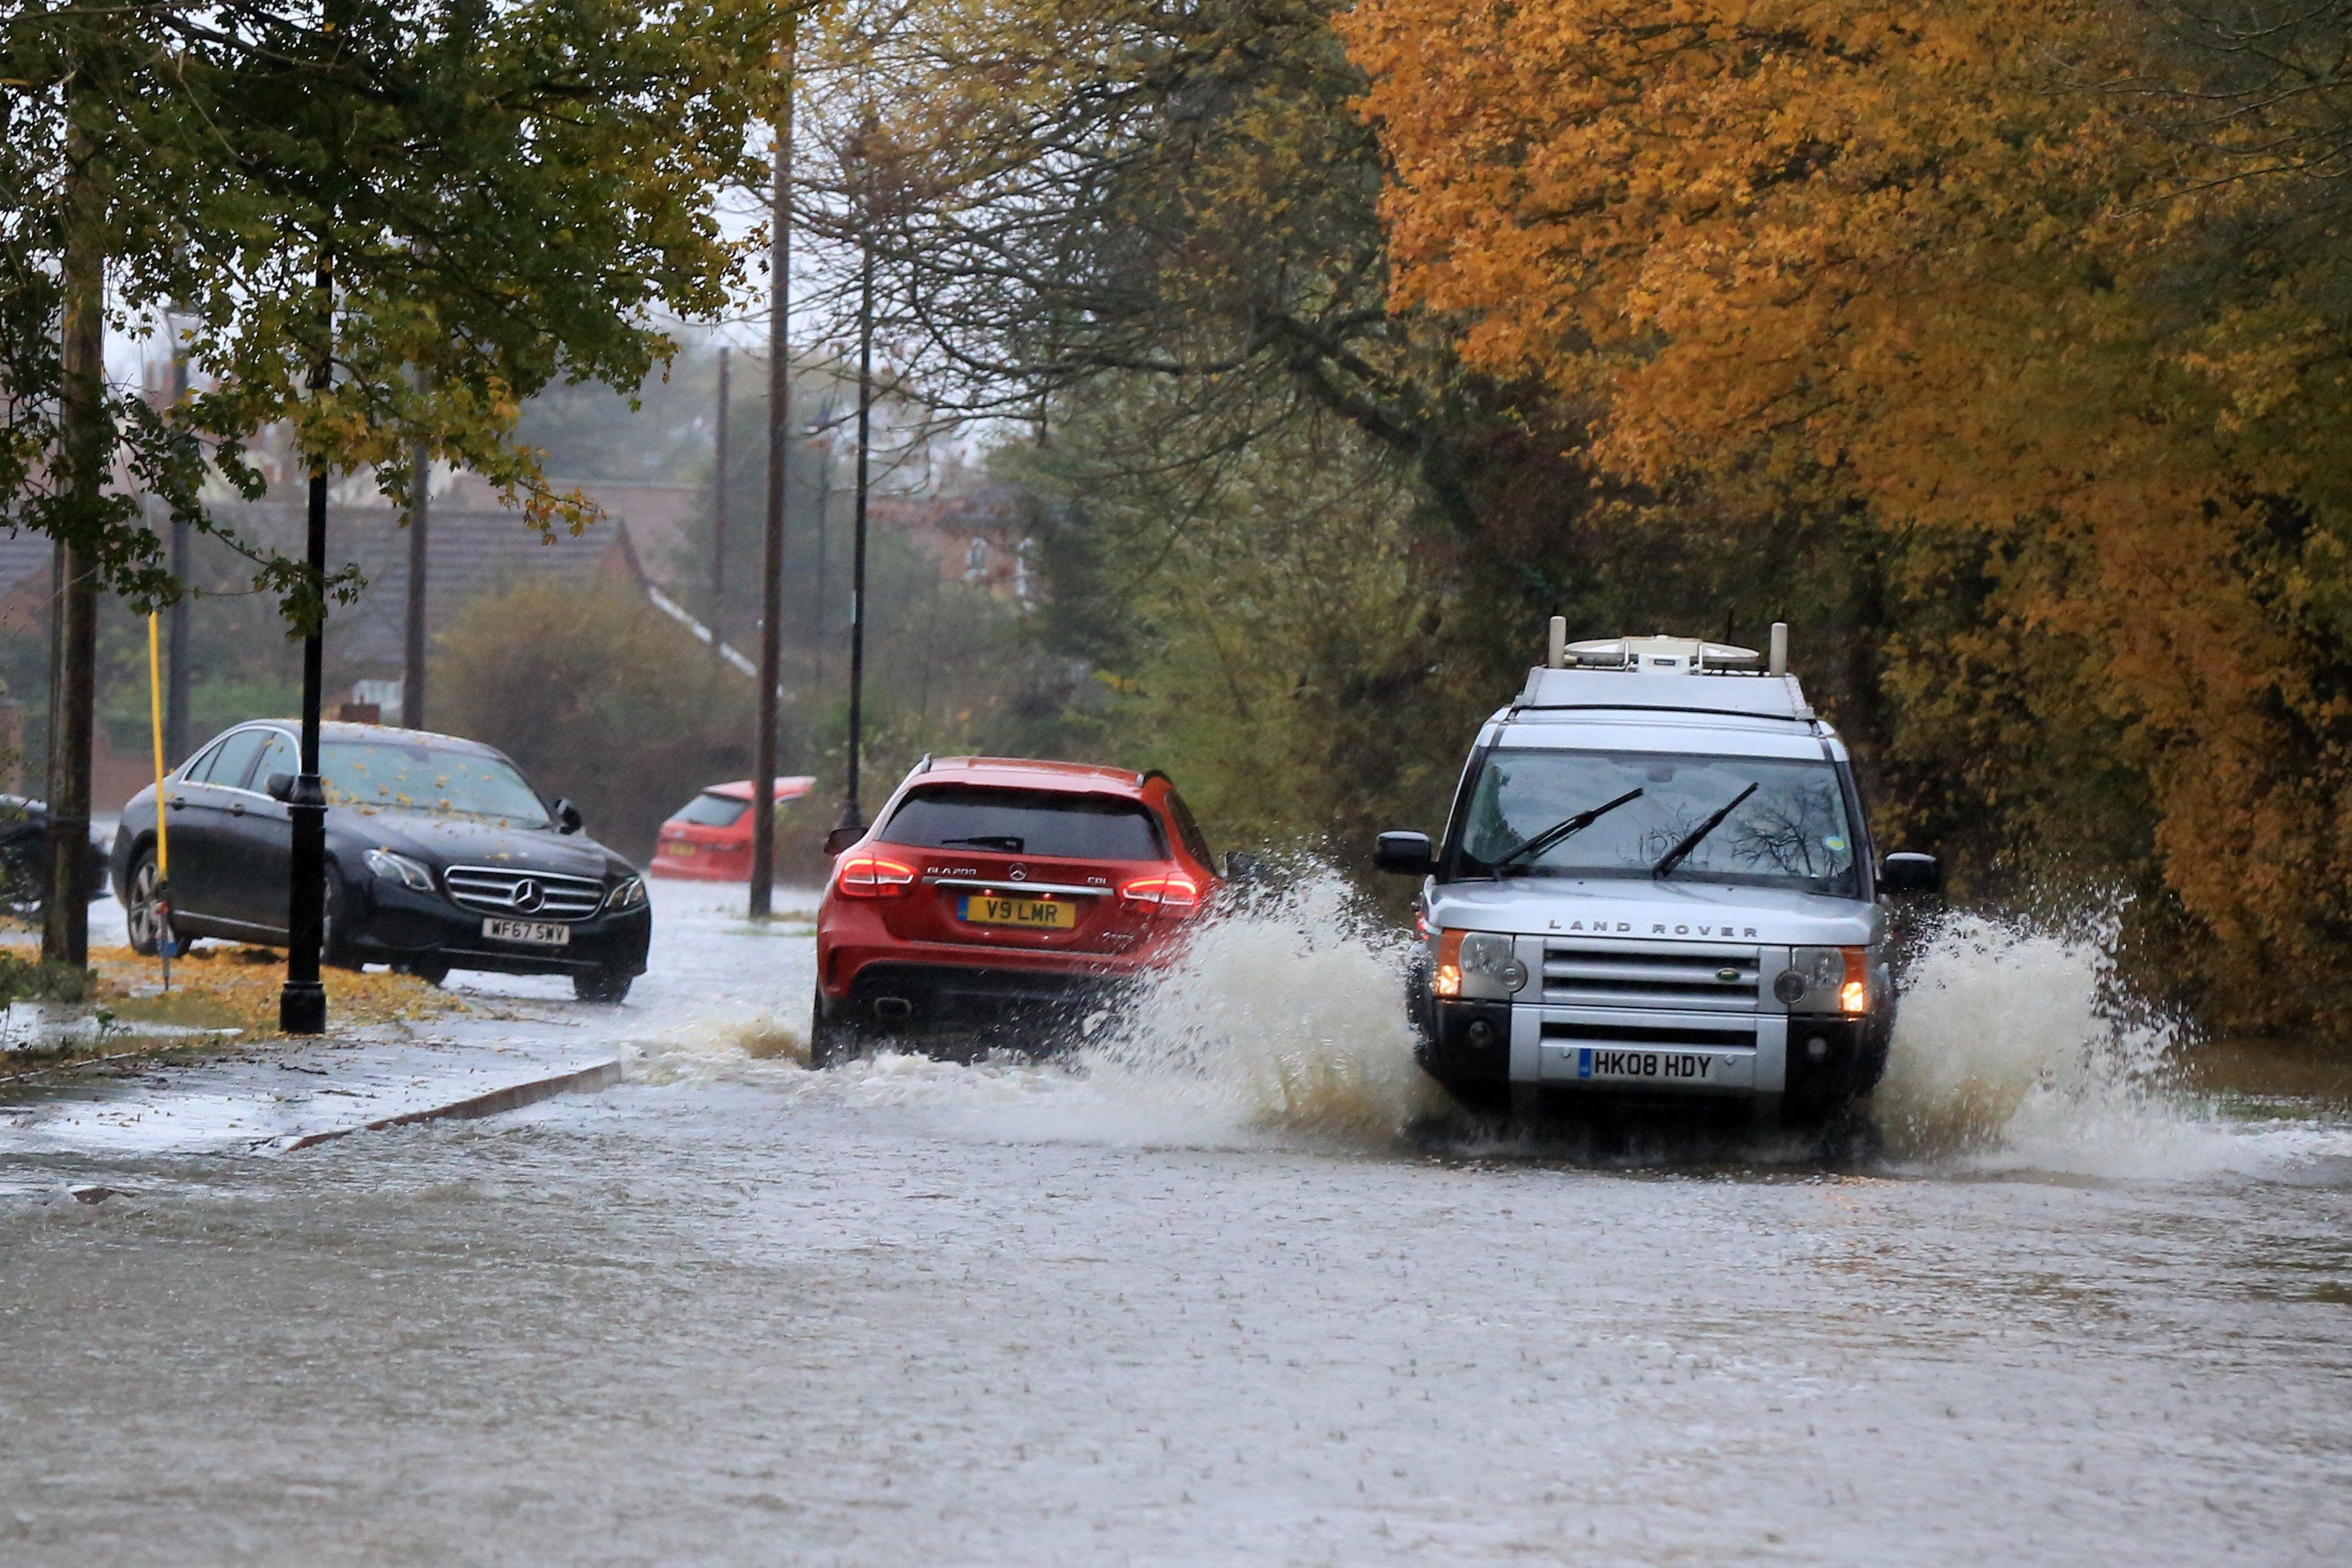 Council issue advice on how residents in flood-hit Doncaster village can receive their post - Doncaster Free Press